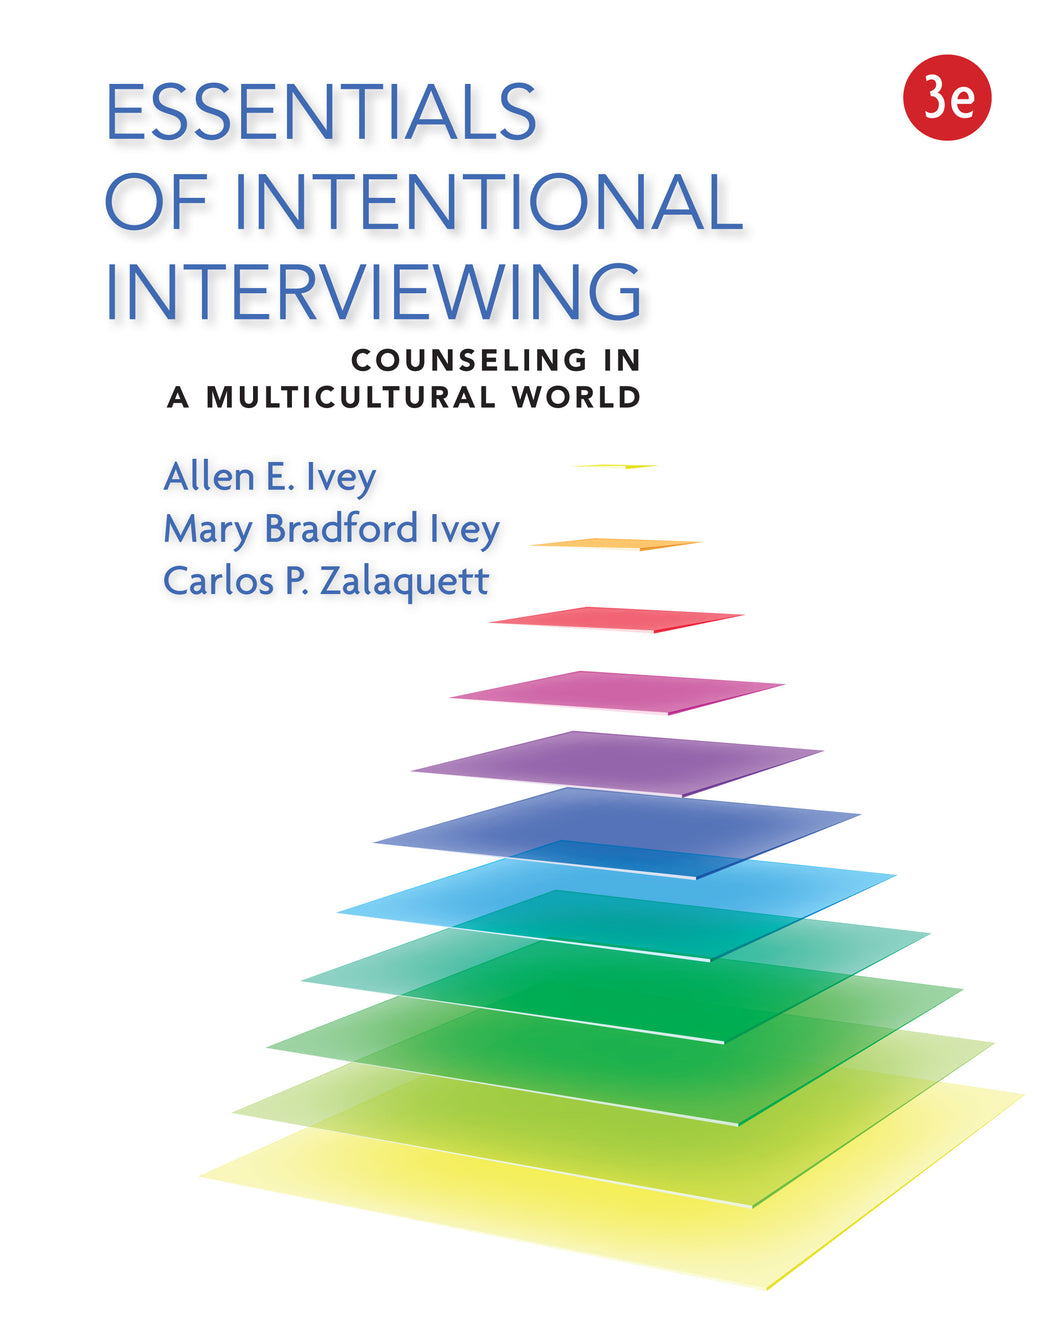 Essentials of Intentional Interviewing, 3rd edition